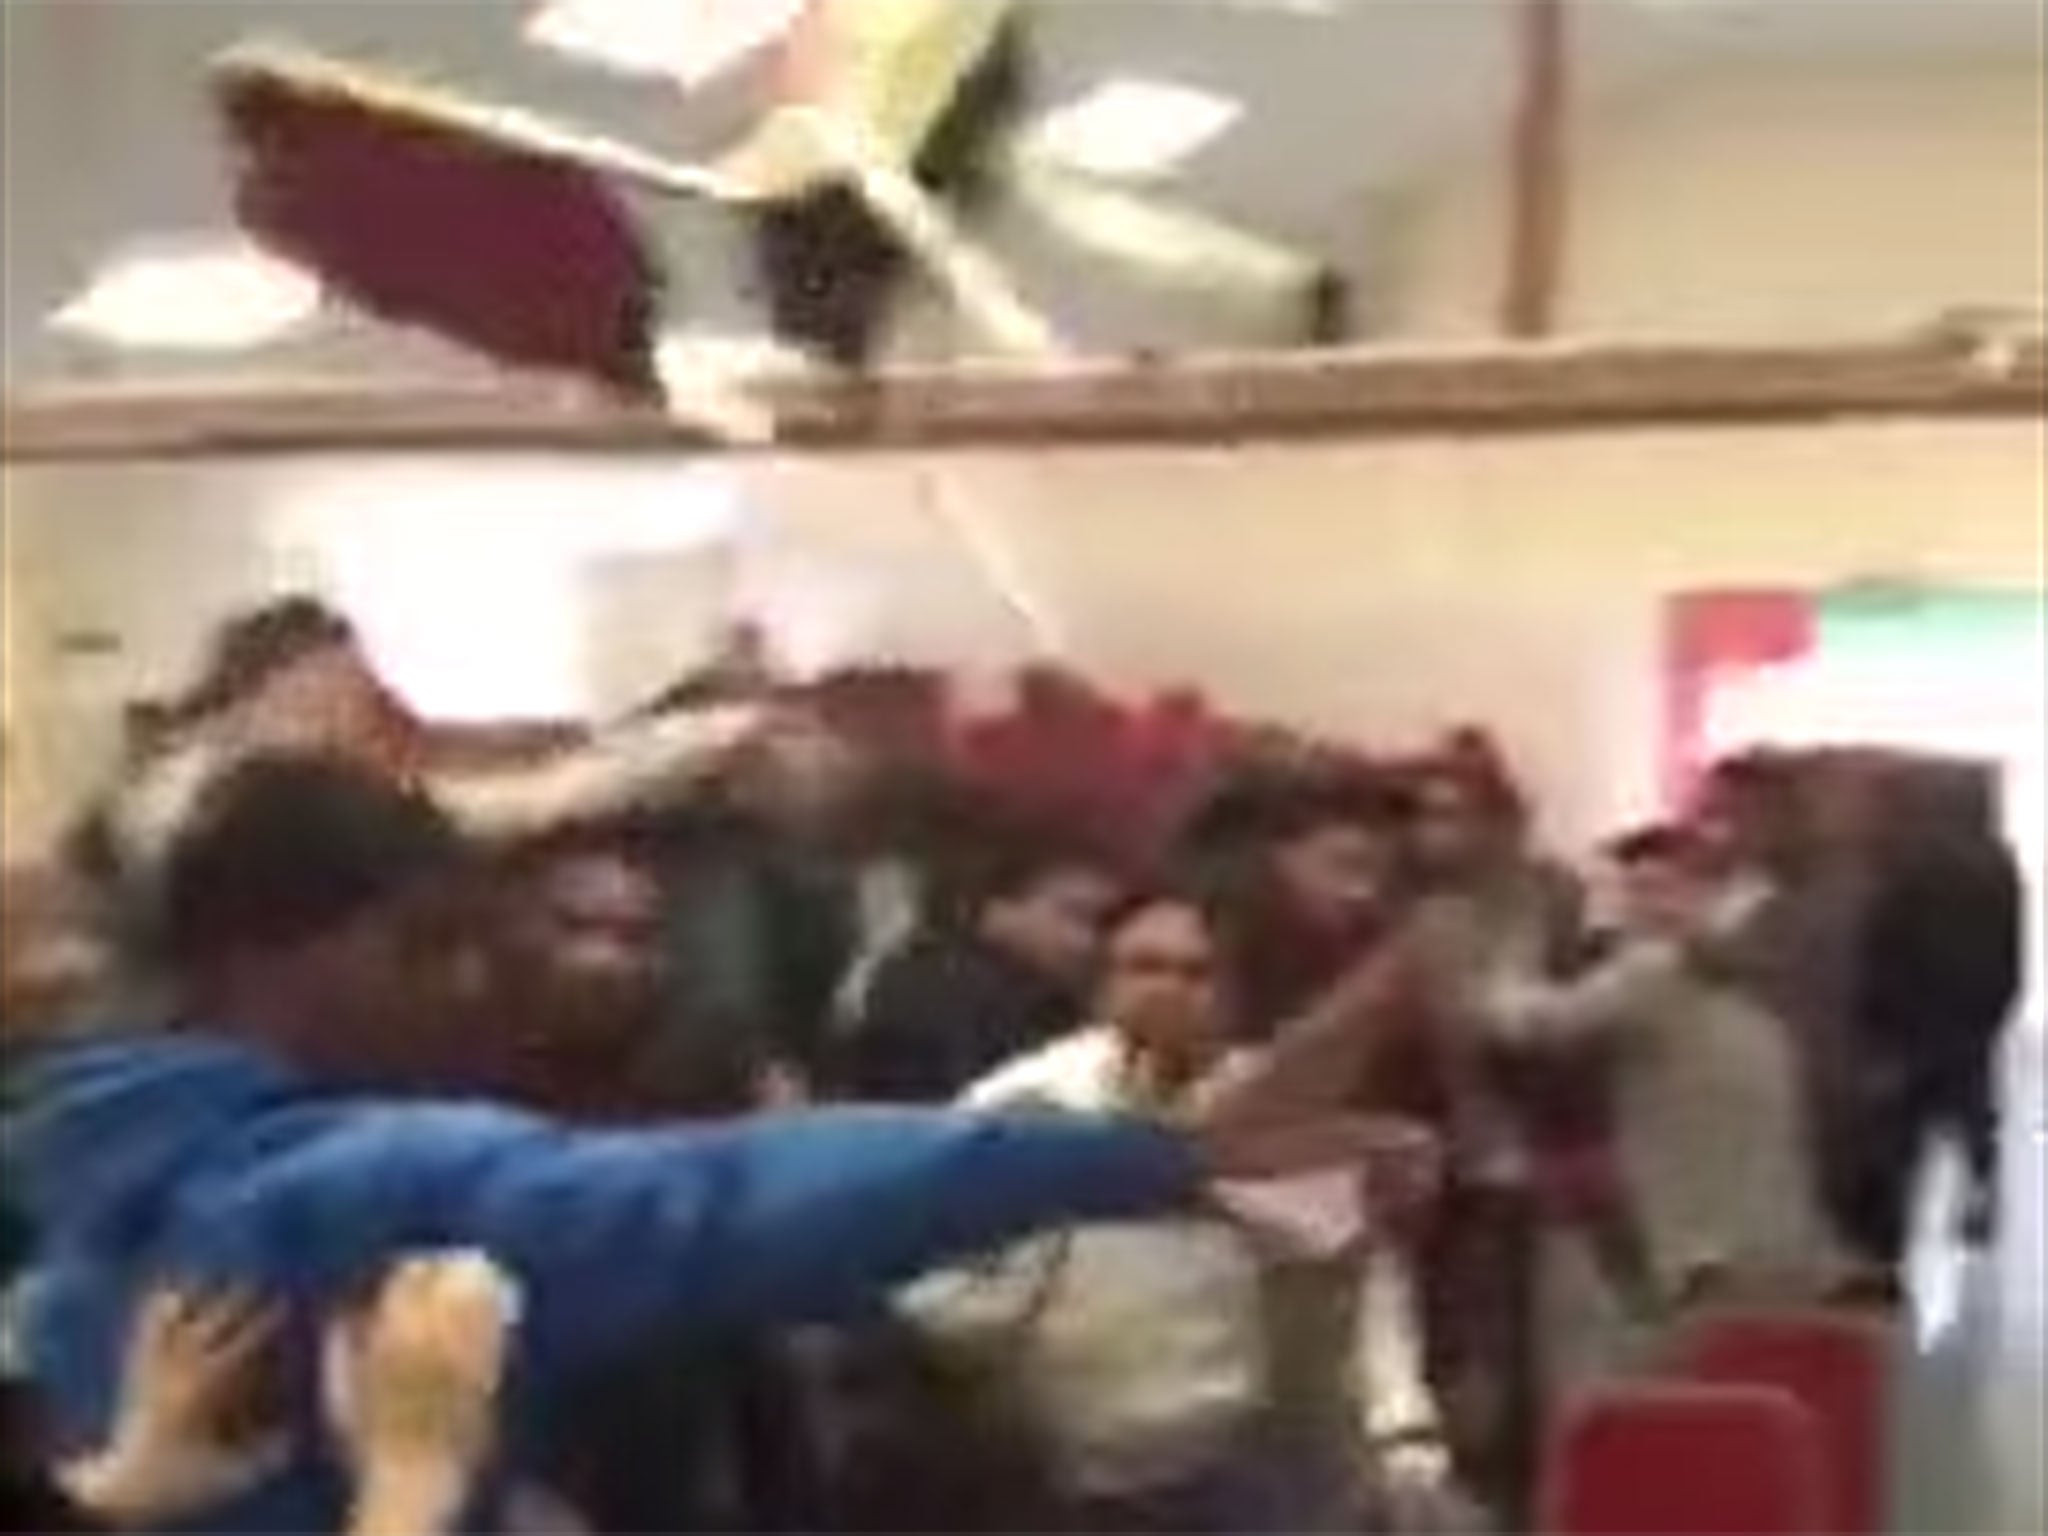 Dozens of chairs were thrown across the room in the footage